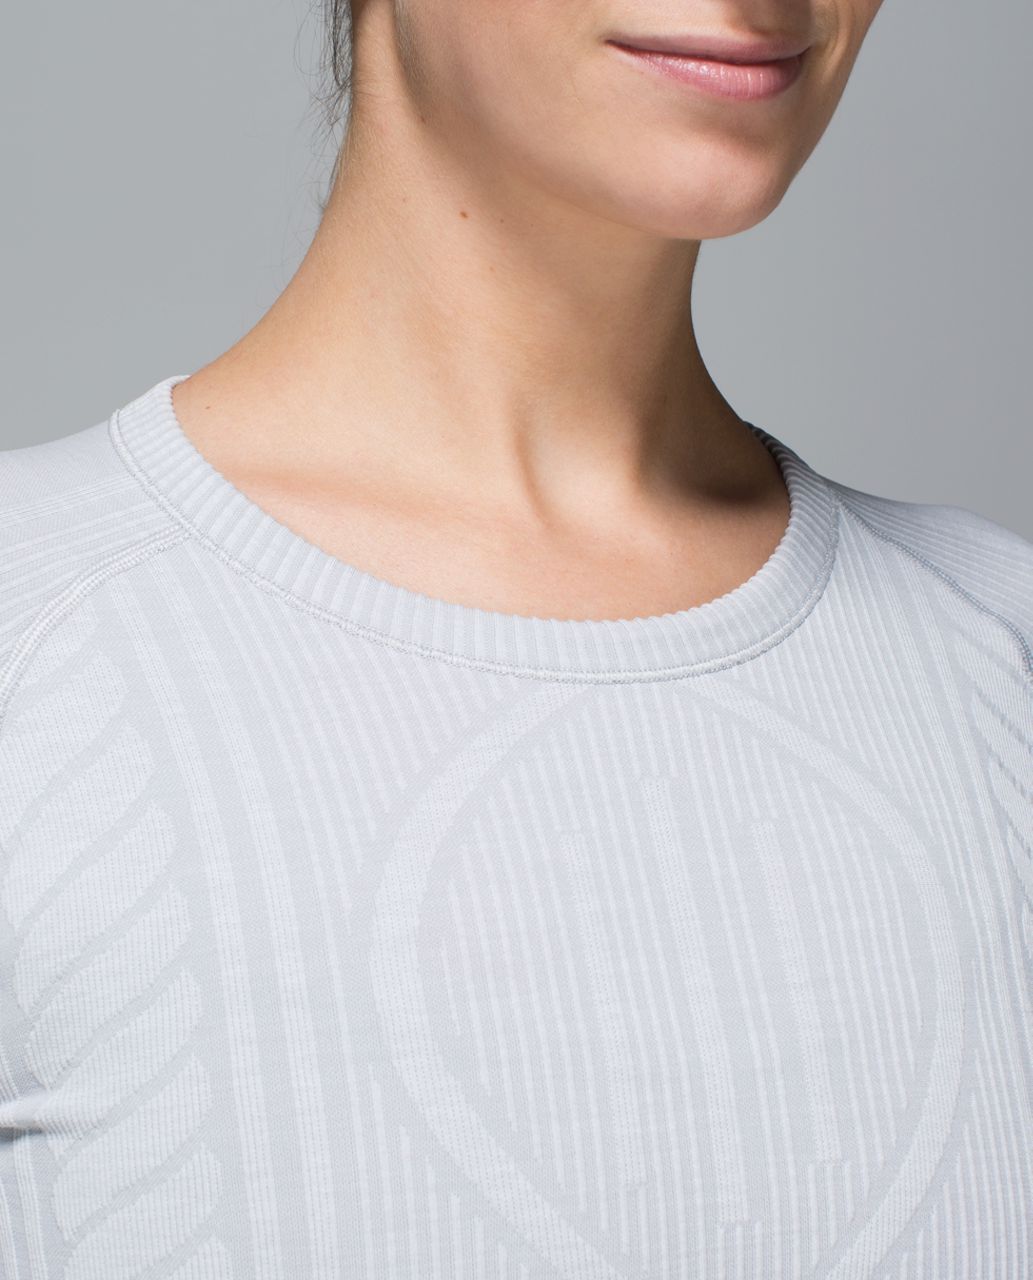 Lululemon Rest Less Pullover - Heathered Silver Spoon